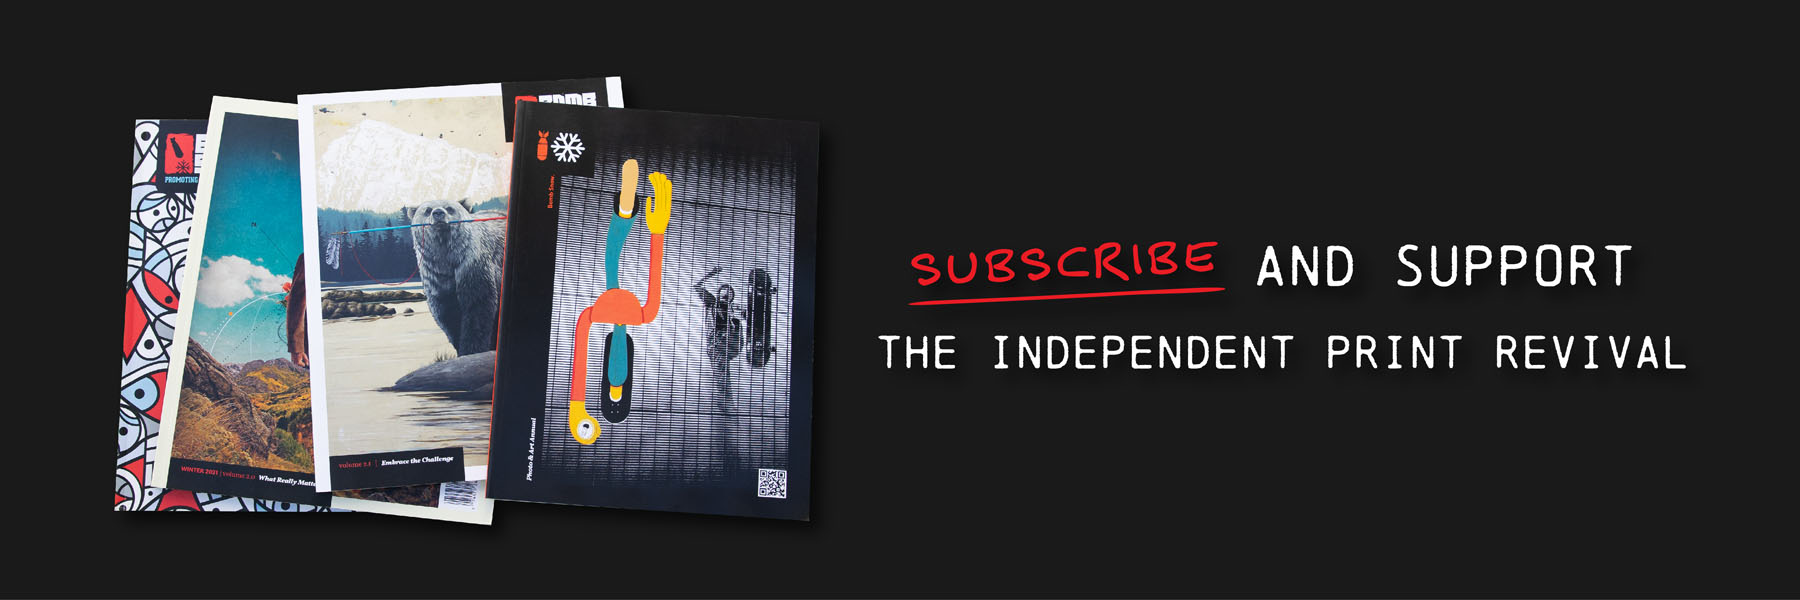 Subscrice and Support the Independent Print Revival